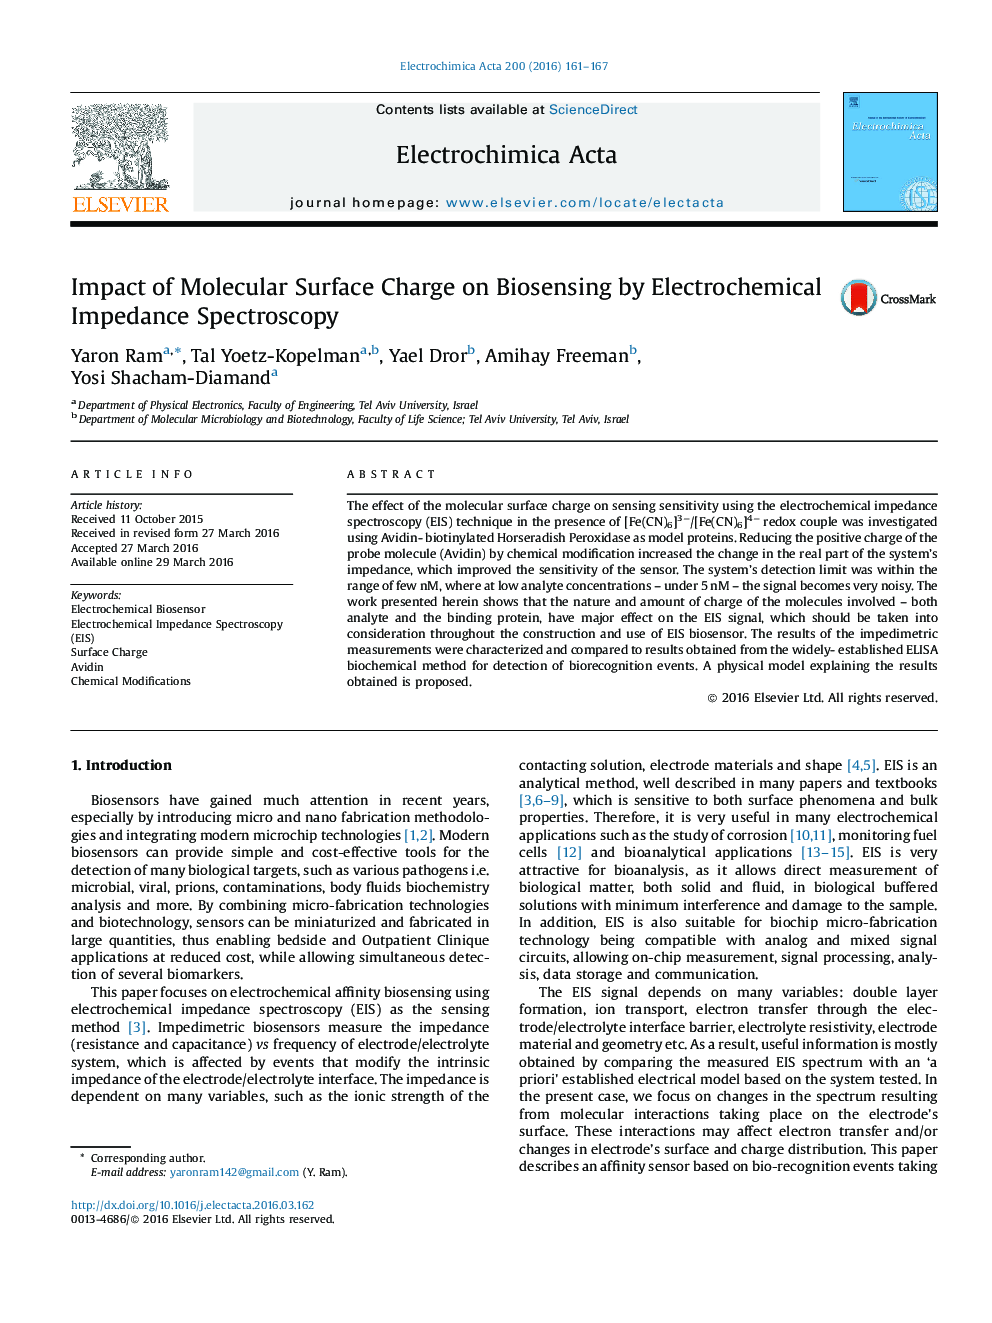 Impact of Molecular Surface Charge on Biosensing by Electrochemical Impedance Spectroscopy